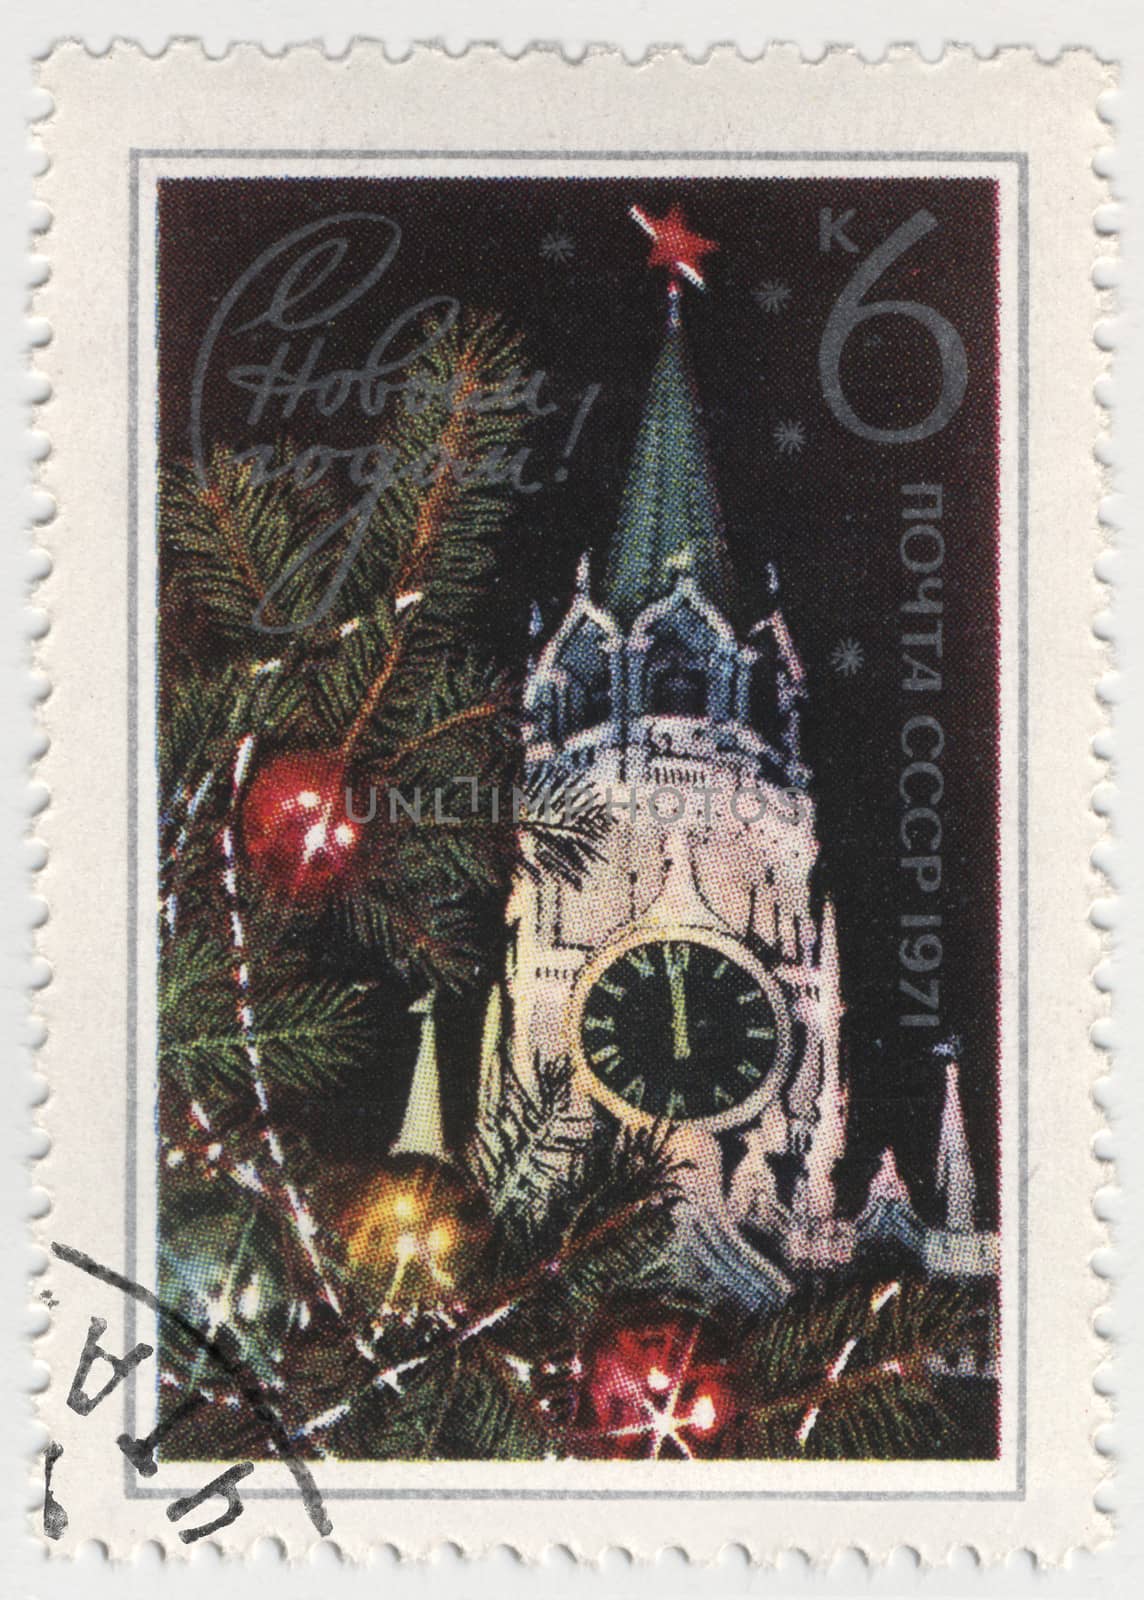 New Year 1971 in Moscow on post stamp by wander